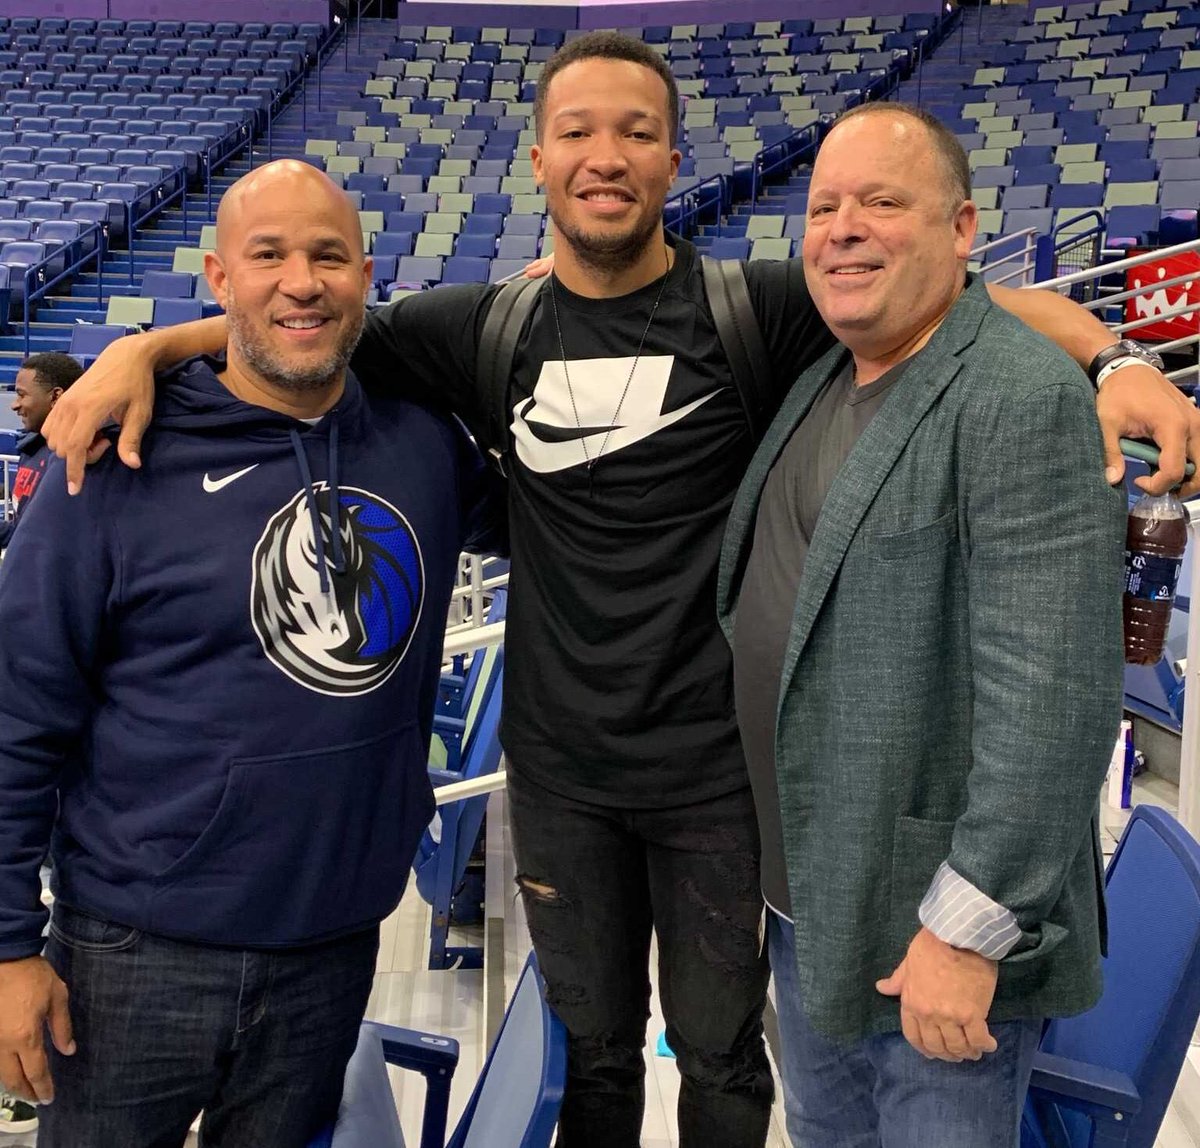  KNICKS OFFSEASON TRADE IDEA ( + thread included)Knicks recieve: Jalen Brunson, Mavs 2022 FRP (most likely lottery or top-20 protected)Mavericks recieve: Obi Toppin, Mavs 2023 pick (with all protections removed)